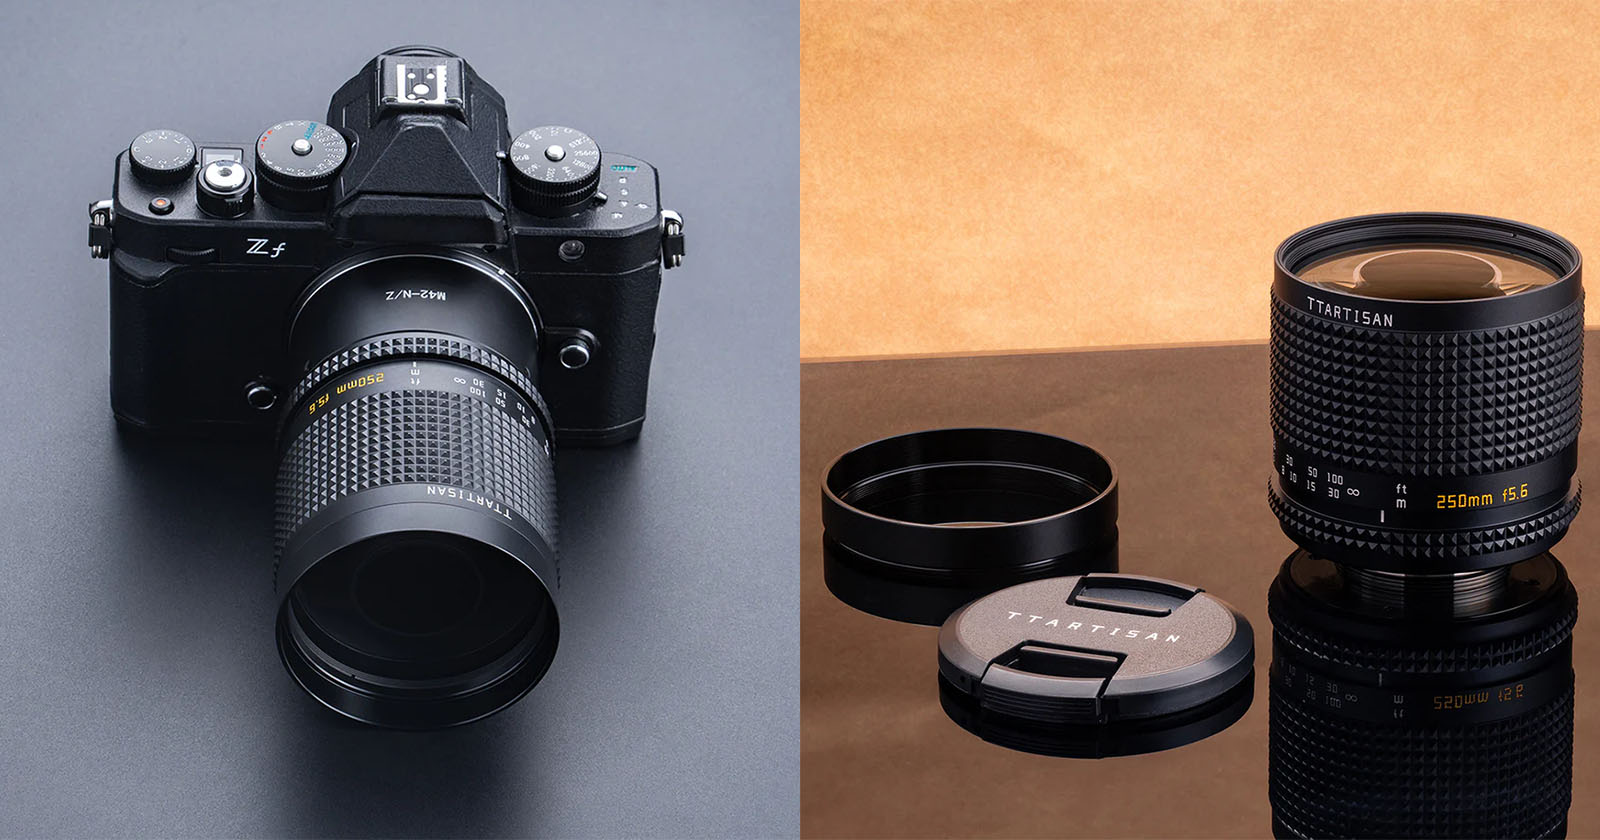 On the left, a black DSLR camera is shown with an attached large lens, placed on a black surface. On the right, a detached camera lens and its cap are displayed on a reflective black surface with a beige background. The lens brand is "TTArtisan.